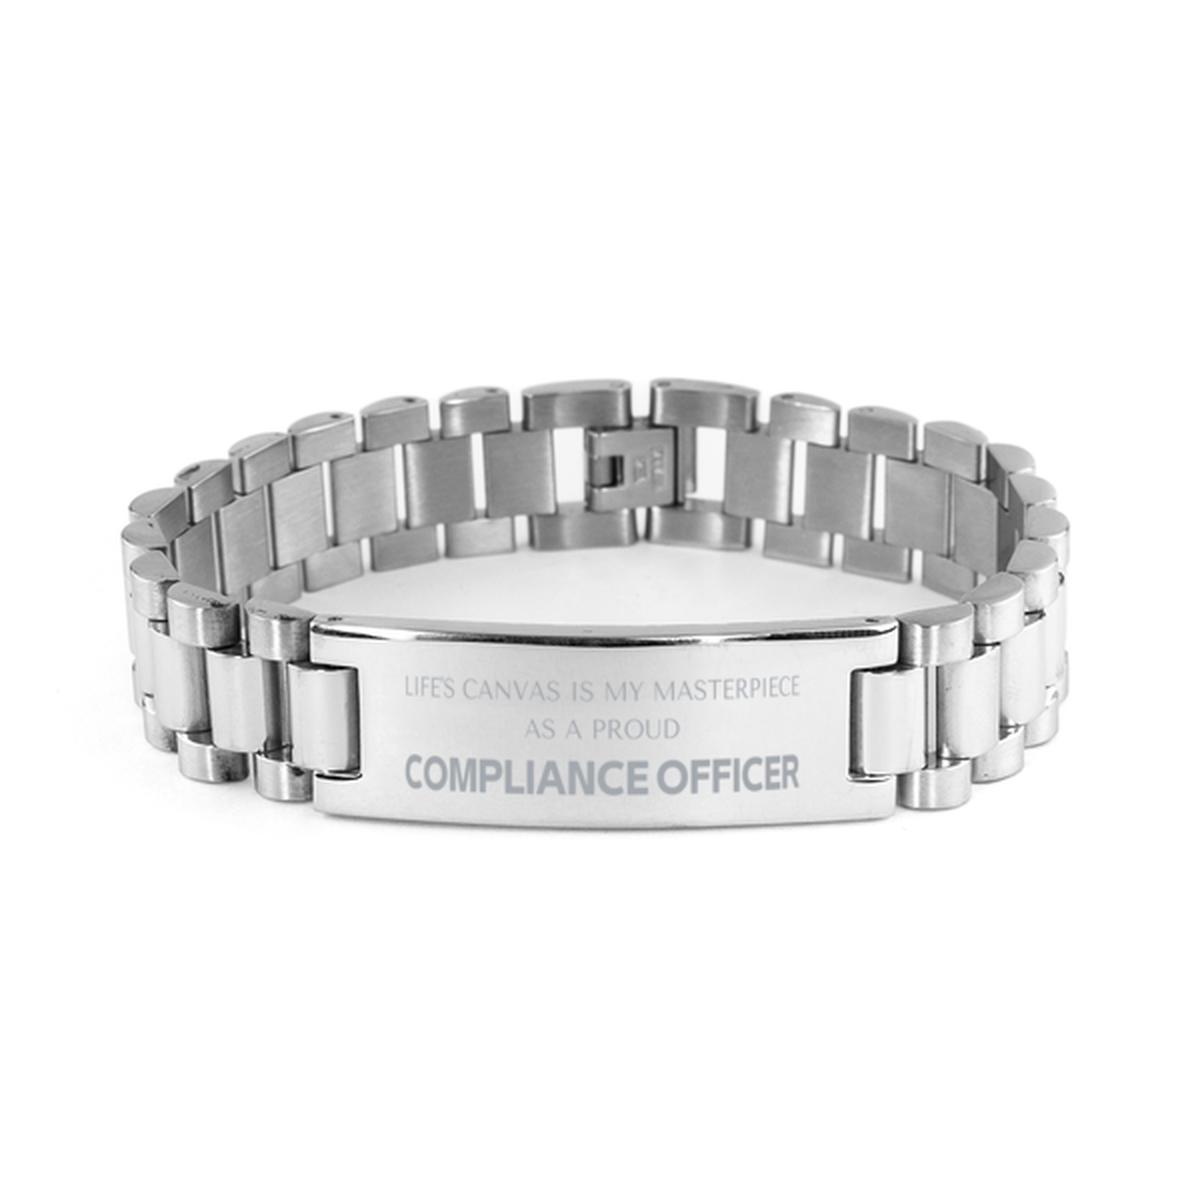 Proud Compliance Officer Gifts, Life's canvas is my masterpiece, Epic Birthday Christmas Unique Ladder Stainless Steel Bracelet For Compliance Officer, Coworkers, Men, Women, Friends